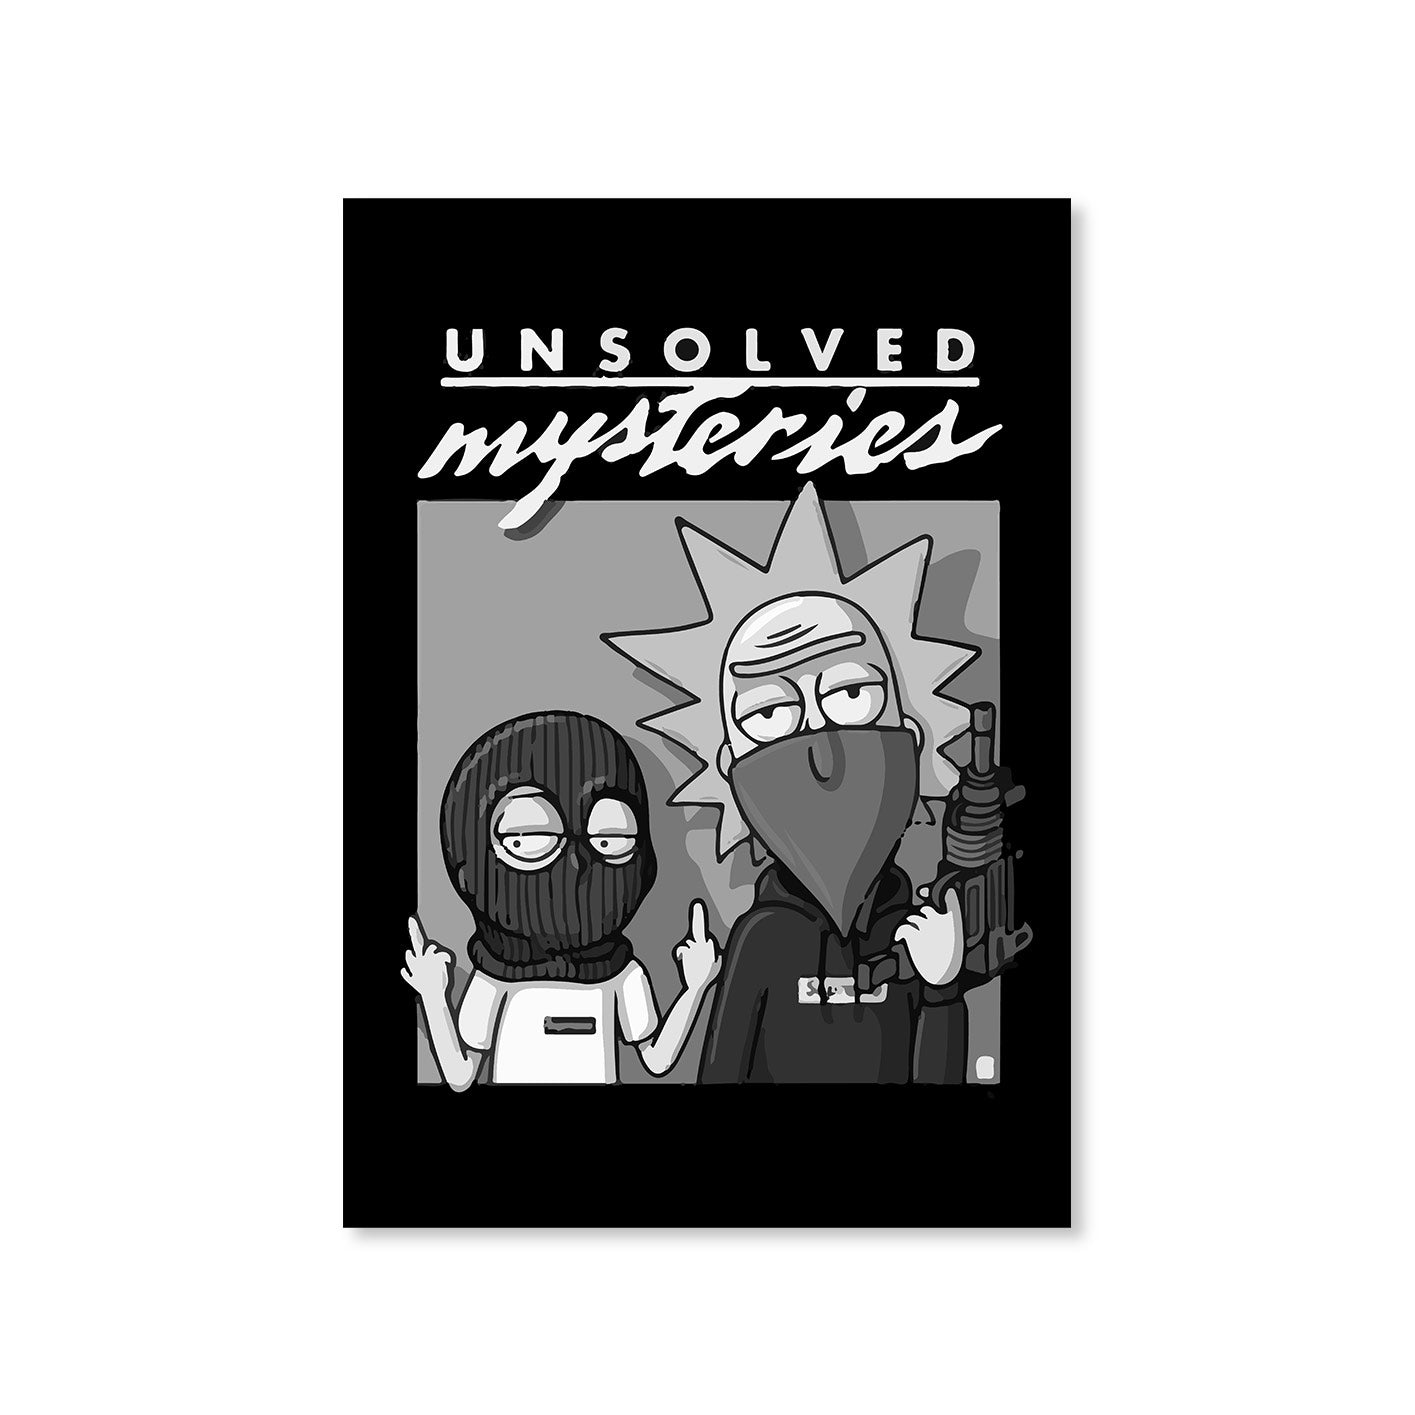 rick and morty unsolved mysteries poster wall art buy online united states of america usa the banyan tee tbt a4 rick and morty online summer beth mr meeseeks jerry quote vector art clothing accessories merchandise